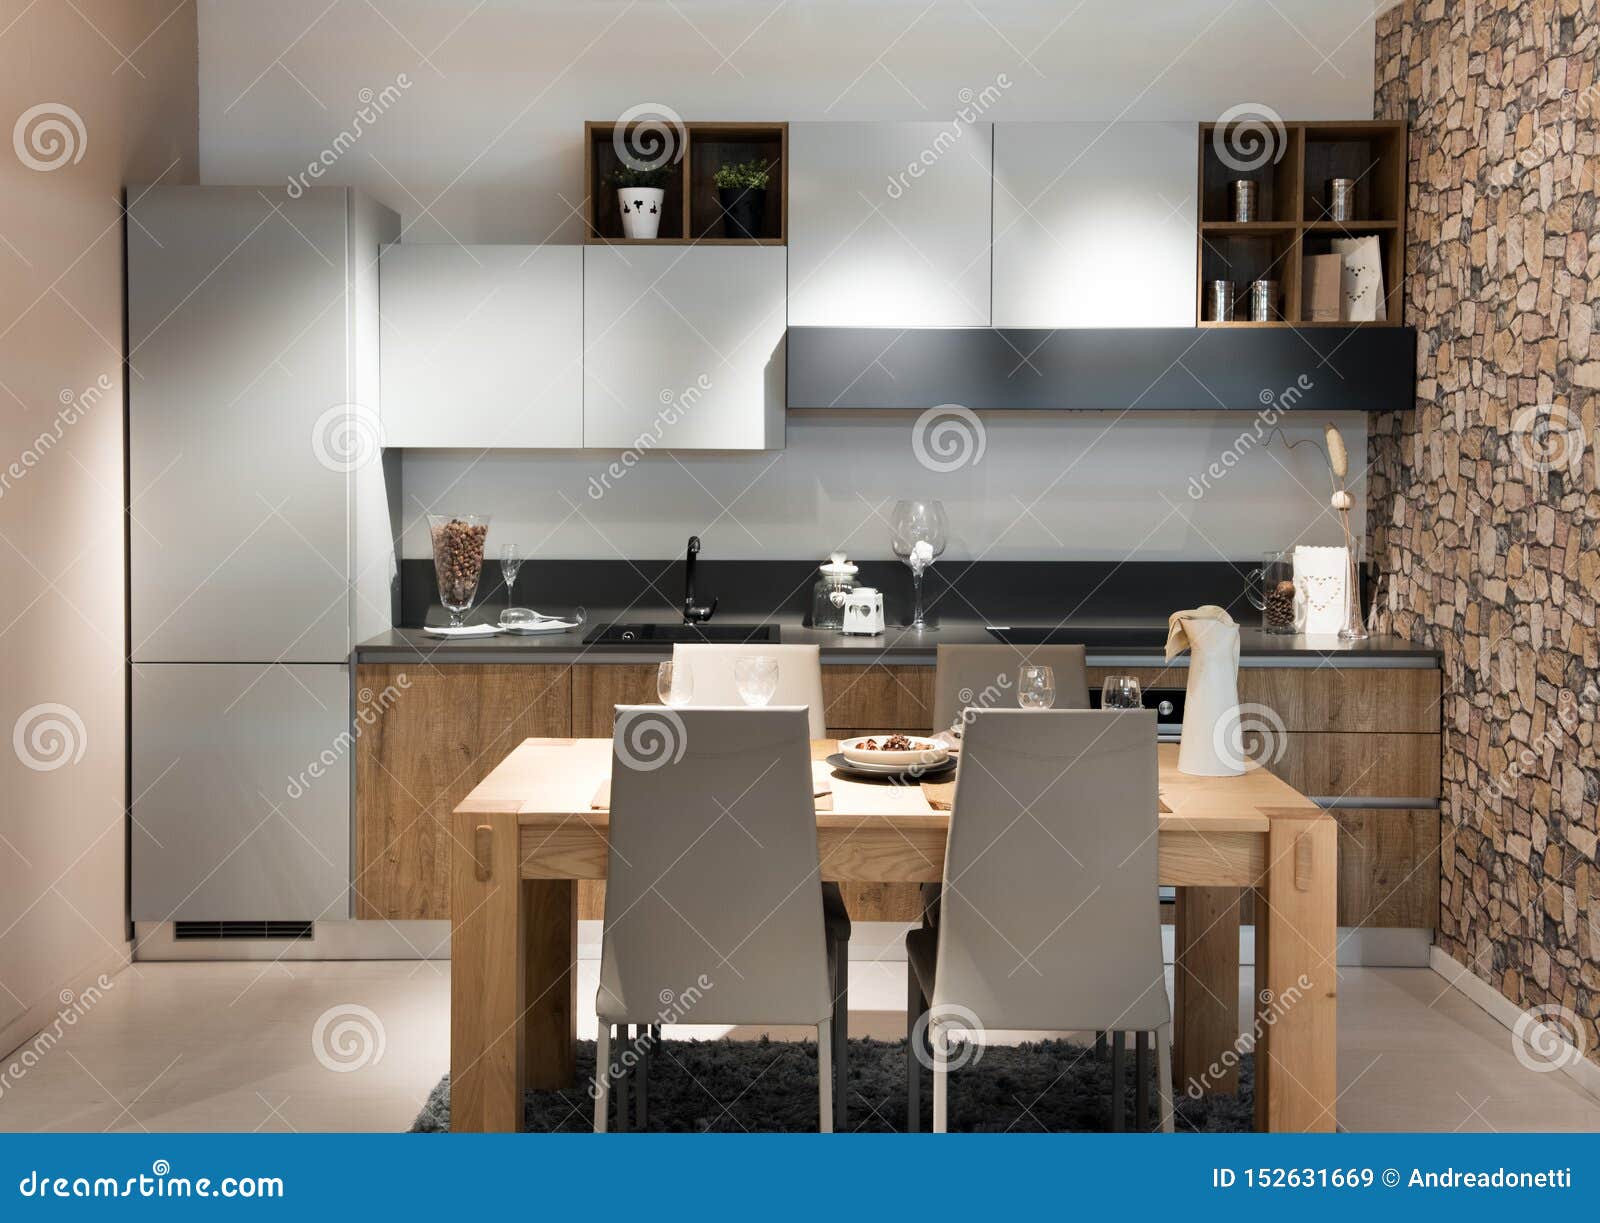 Compact Modern Kitchen Or Kitchenette Stock Image Image Of Built